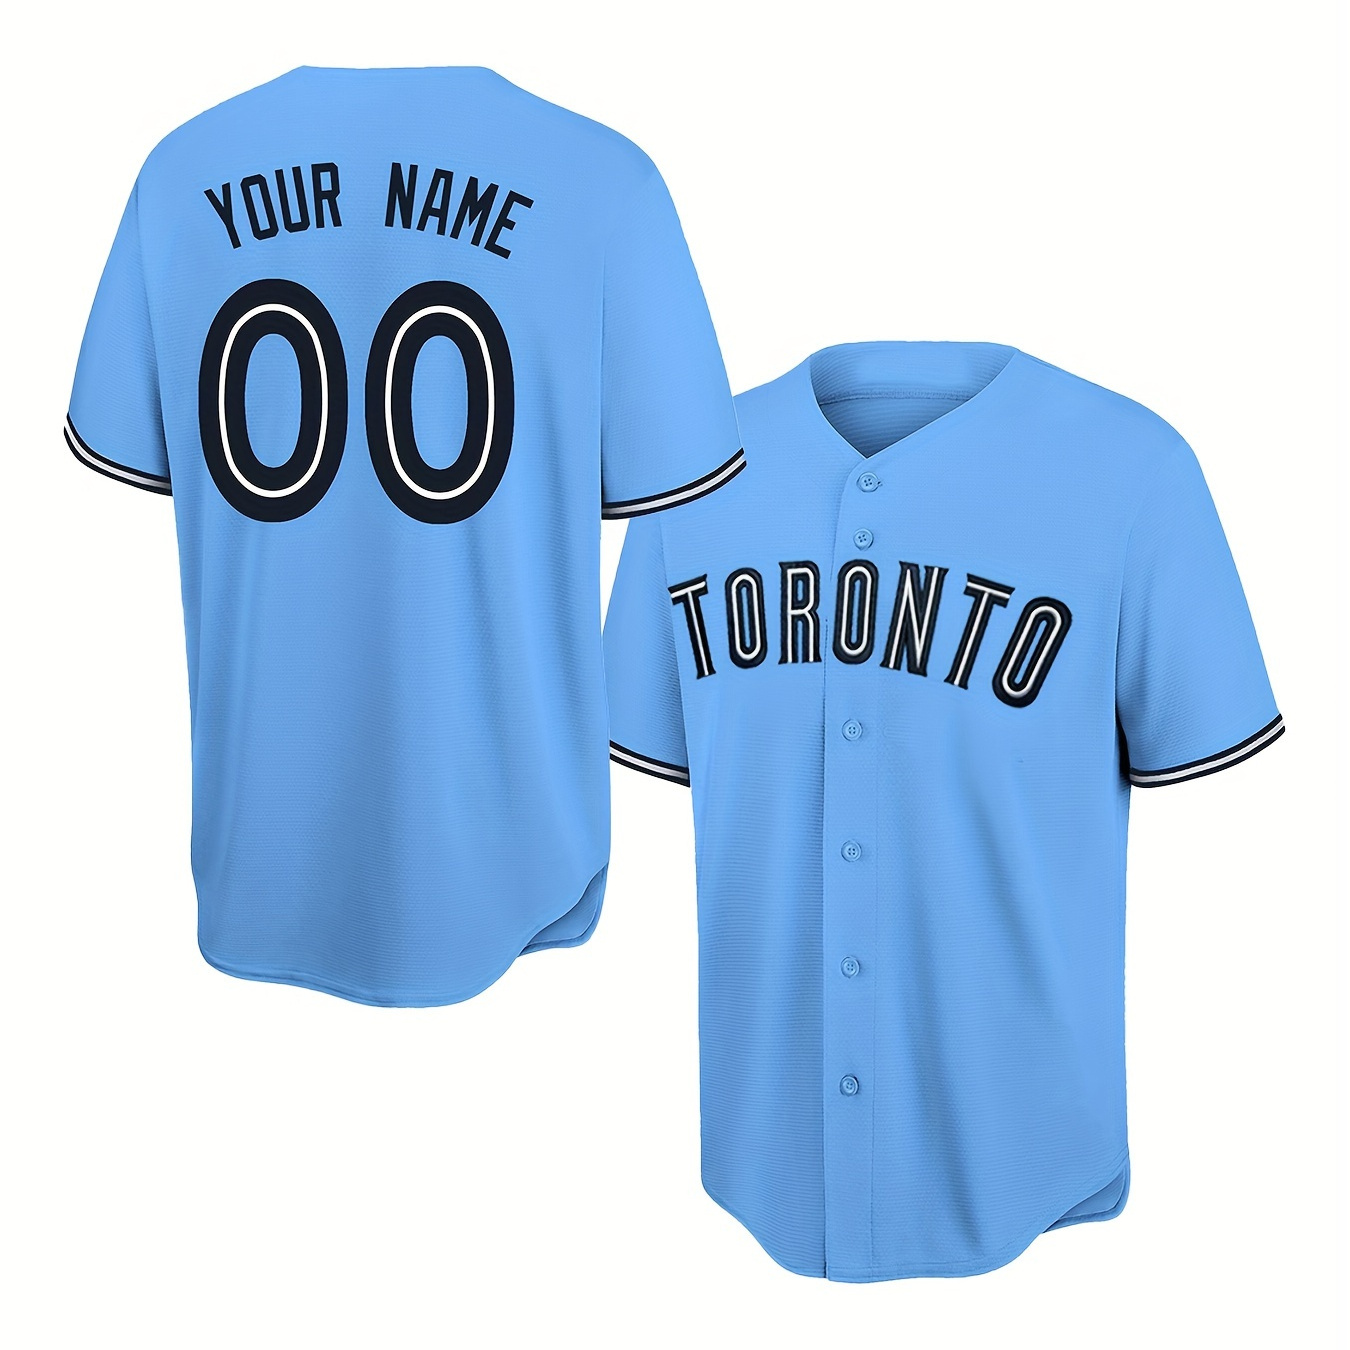 

Customized Name And Number Design, Men's Toronto Embroidery Design Short Sleeve Loose Breathable V-neck Baseball Jersey, Sports Shirt For Team Training